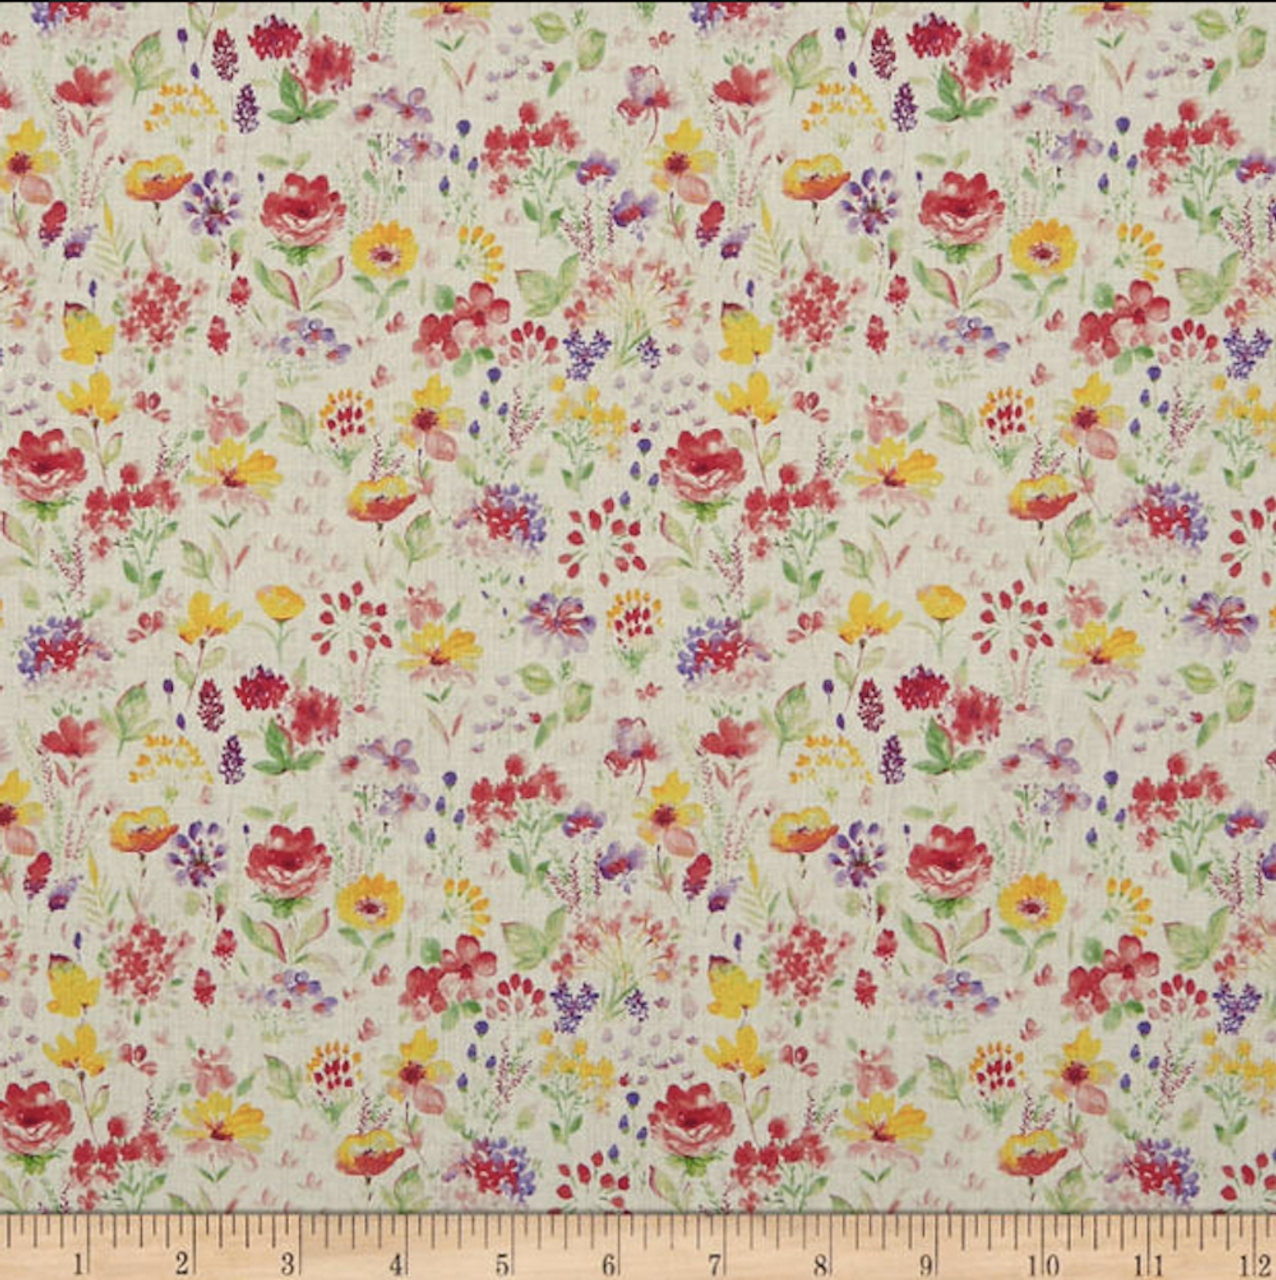 Stof of France Un Jour En Ete Wild Flowers Pink Cotton Quilting Fabric By The Yard